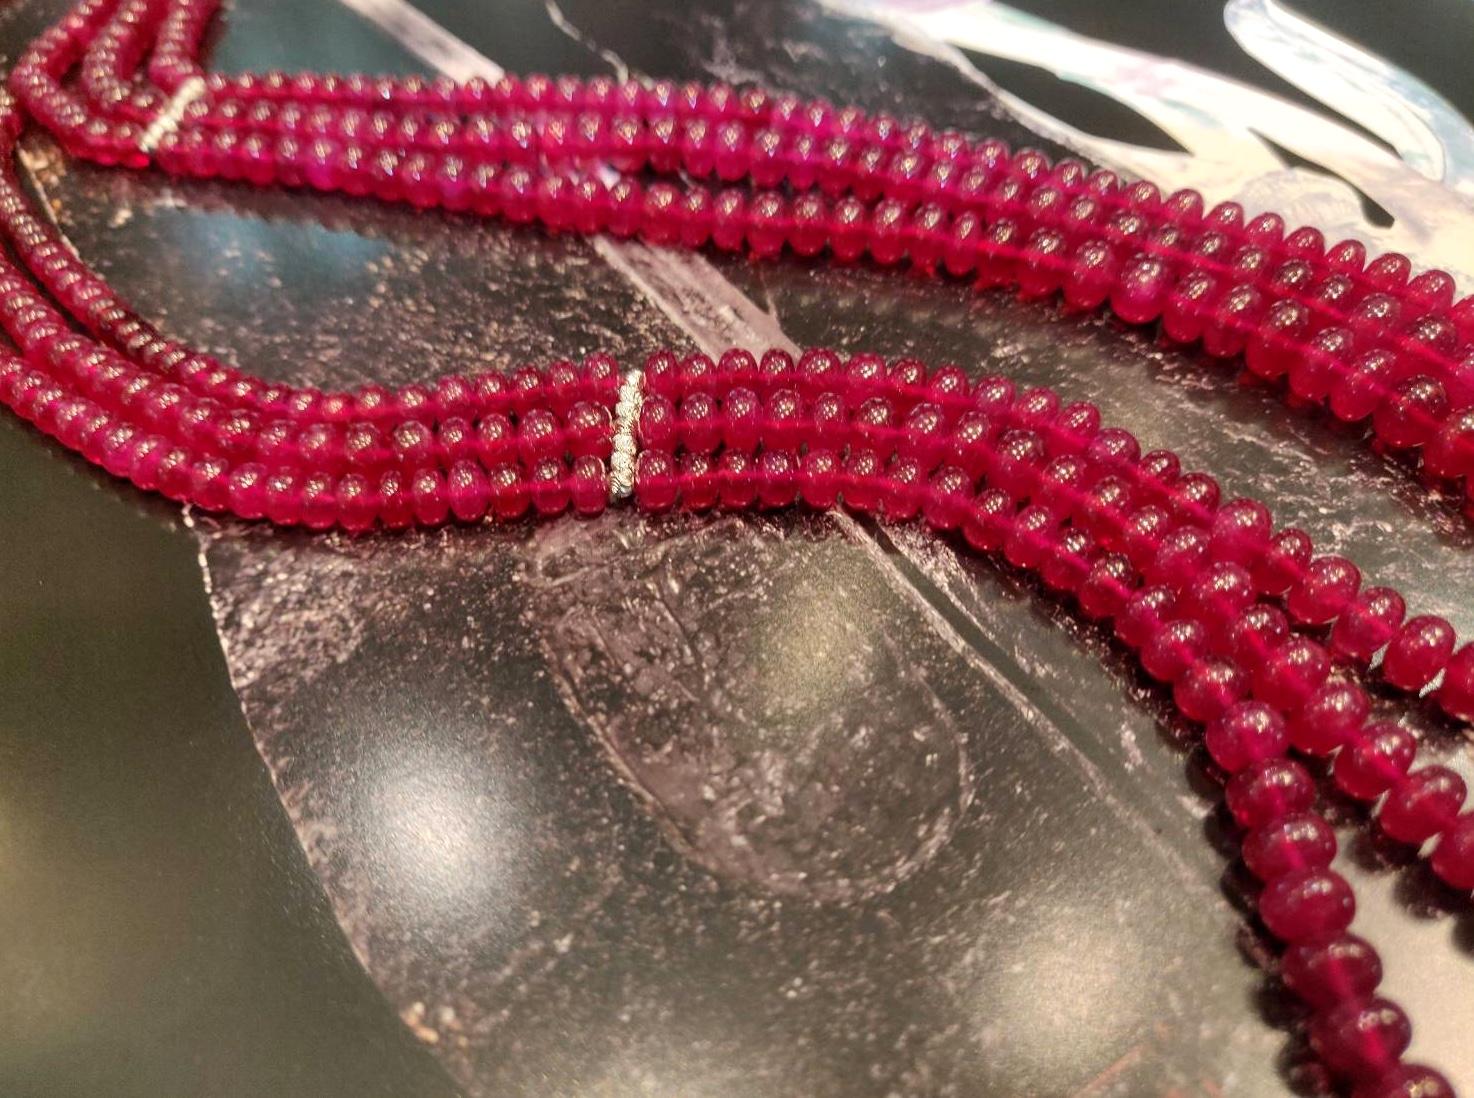 ---------------------------------------
         BESPOKE PIECE
---------------------------------------

Triple Strand Ruby Bead Necklace with Faceted Diamond Cut White Gold Bar Spacers

Gold: 18K White Gold, approx. 1.5 g
Ruby: Cabochon Bead,